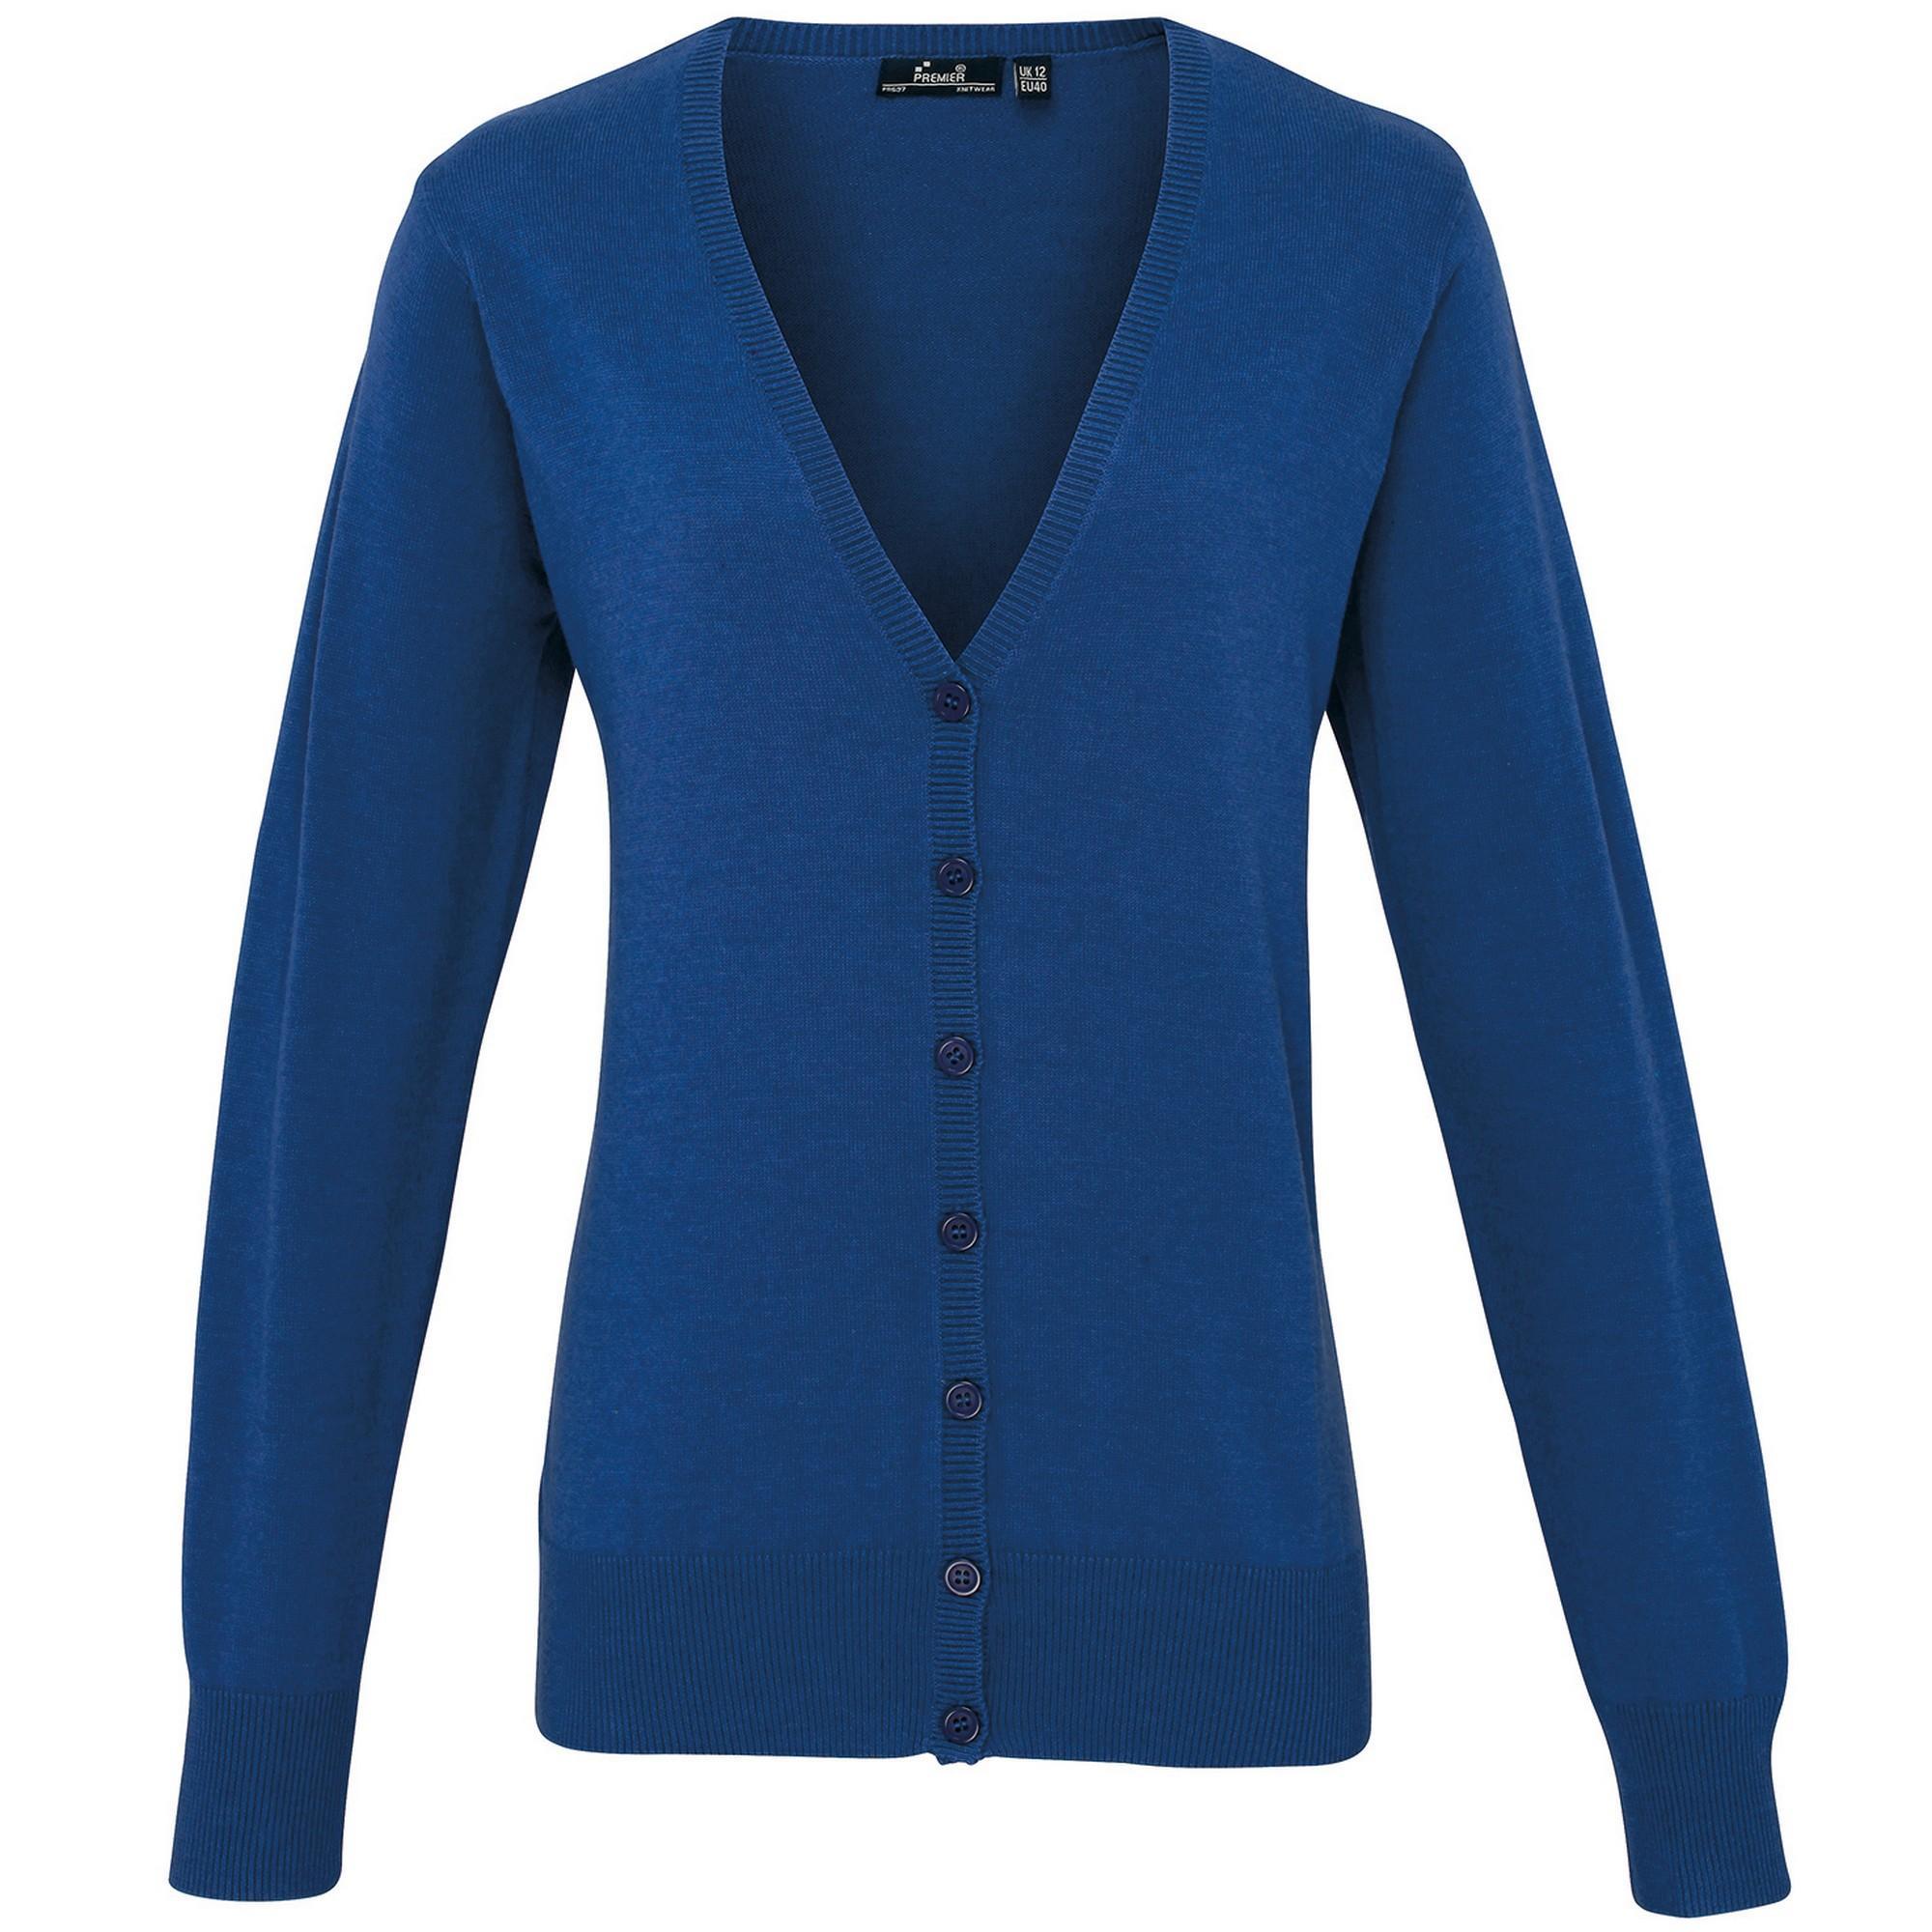 Premier Womens/Ladies Button Through Long Sleeve V-neck Knitted Cardigan (Royal) (24)